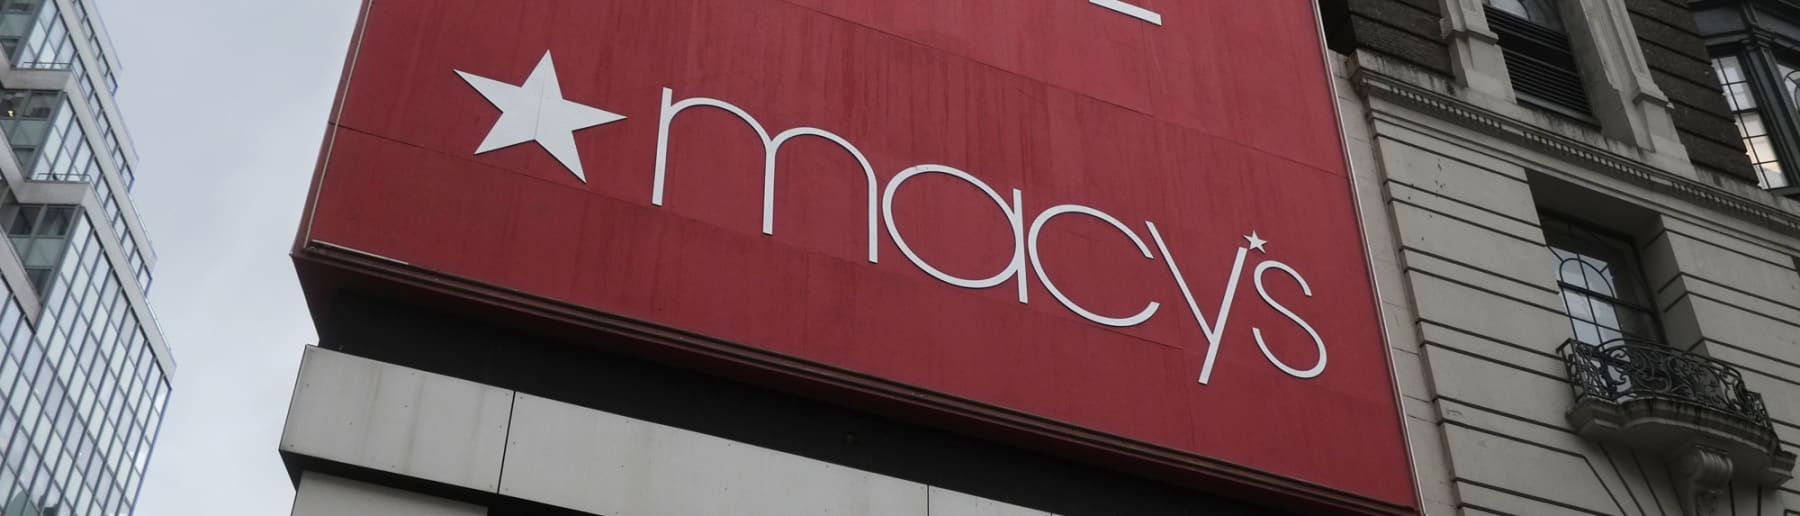 Red and white Macy's sign shown on side of building.